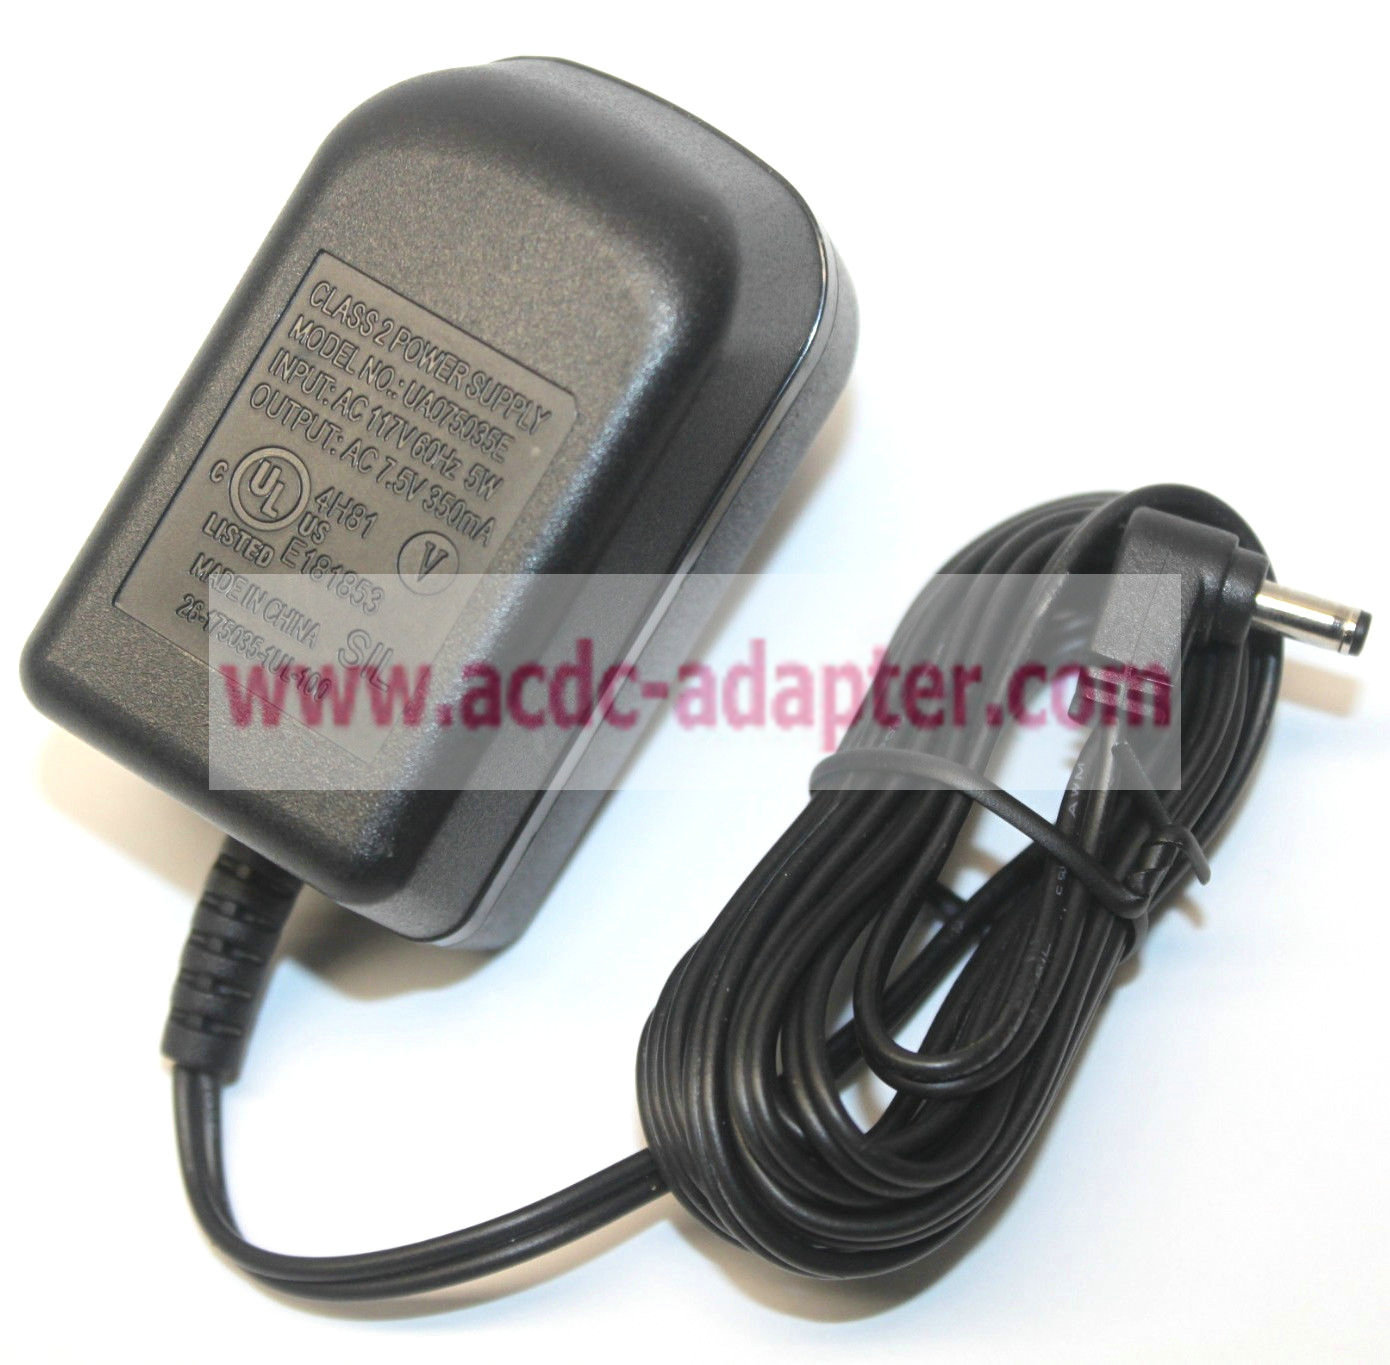 New 7.5V AC 350mA AC Adapter UA075035E Class 2 Power Supply Wall Plug-In Charger